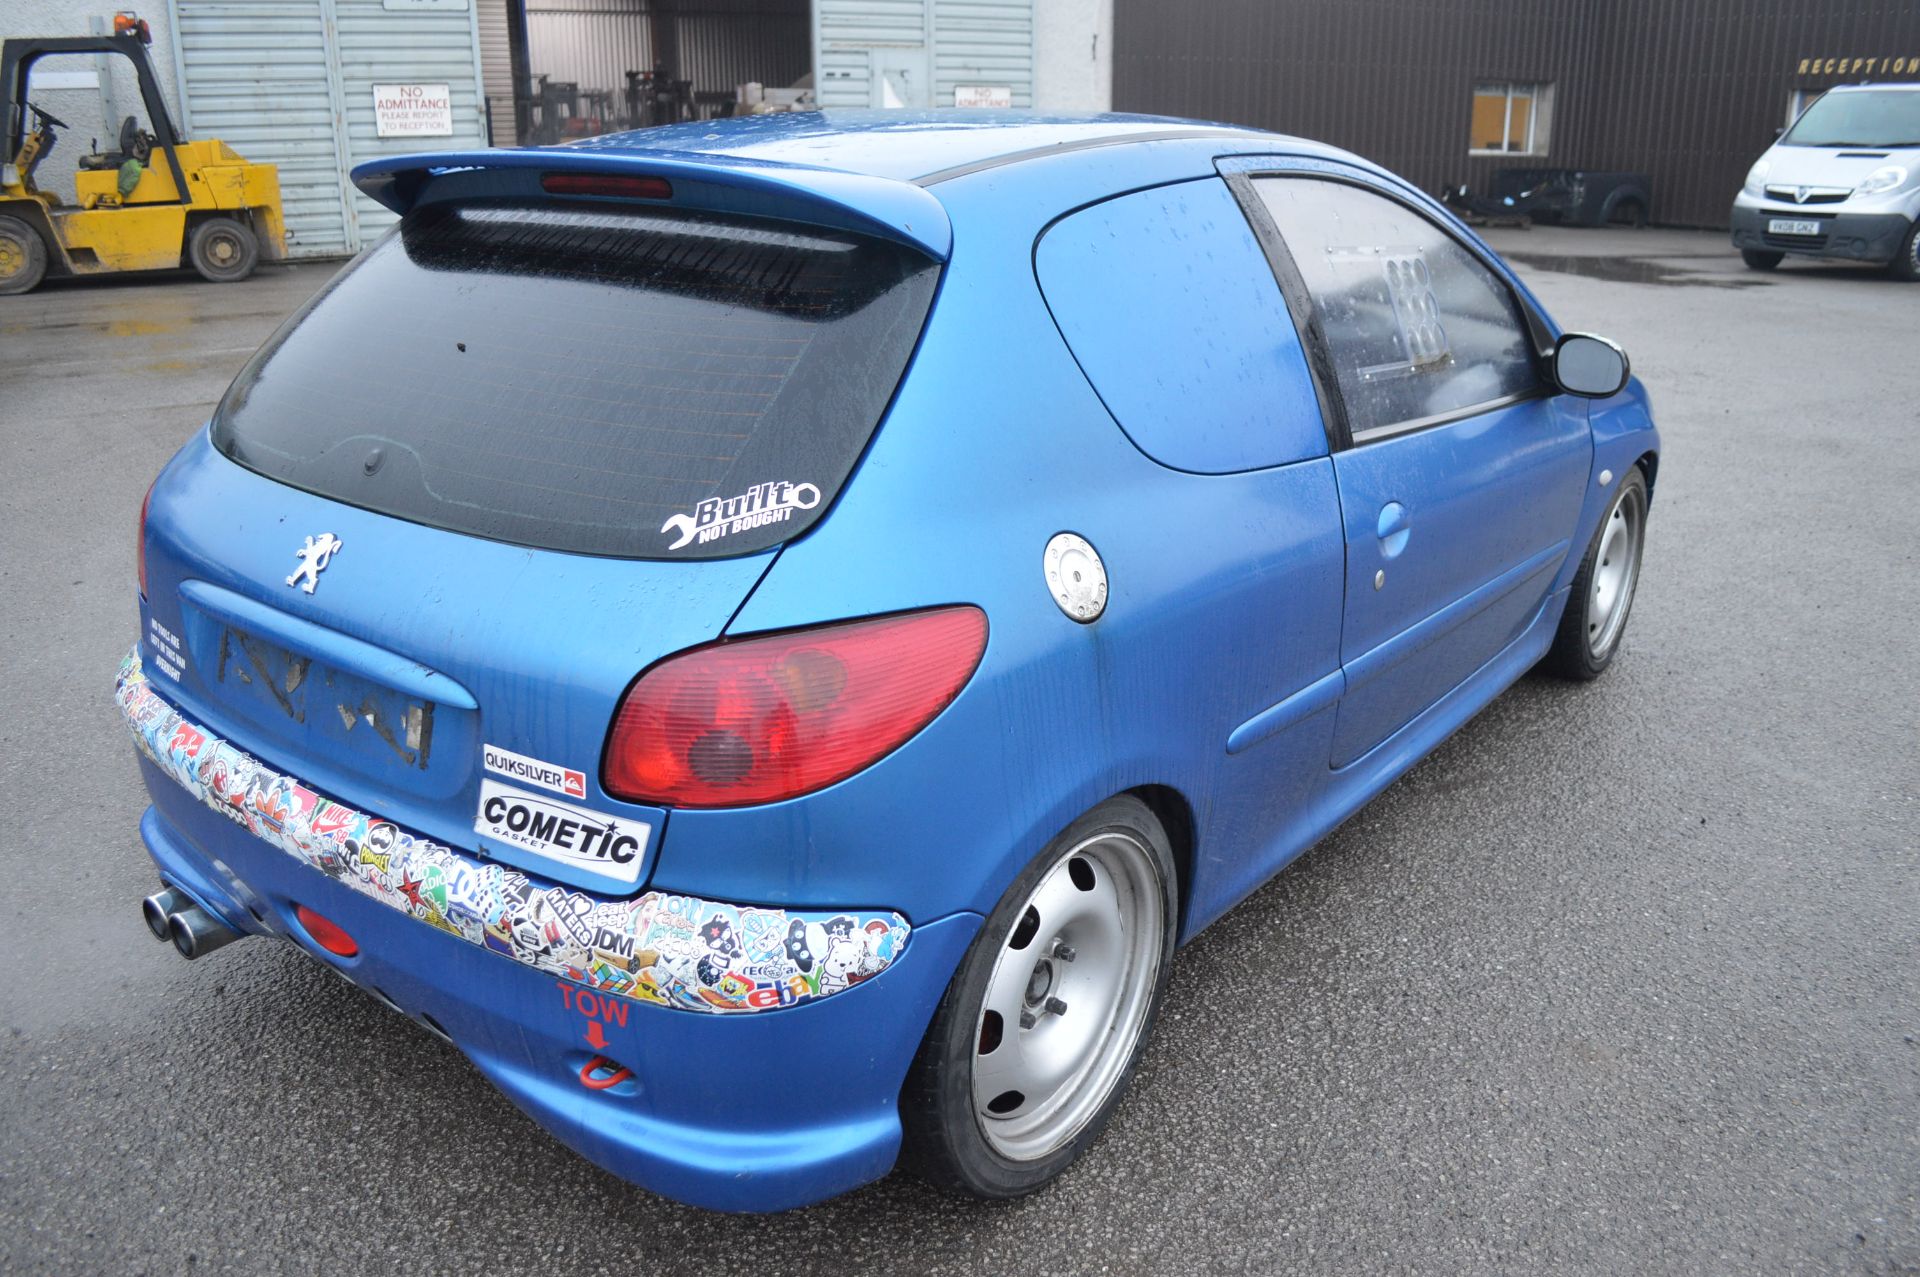 2003/03 REG PEUGEOT 206 GTI 180HP FAST TRACK DAY CAR  HAS THE 'VAN' PANELS FITTED INSTEAD OF REAR - Image 6 of 14